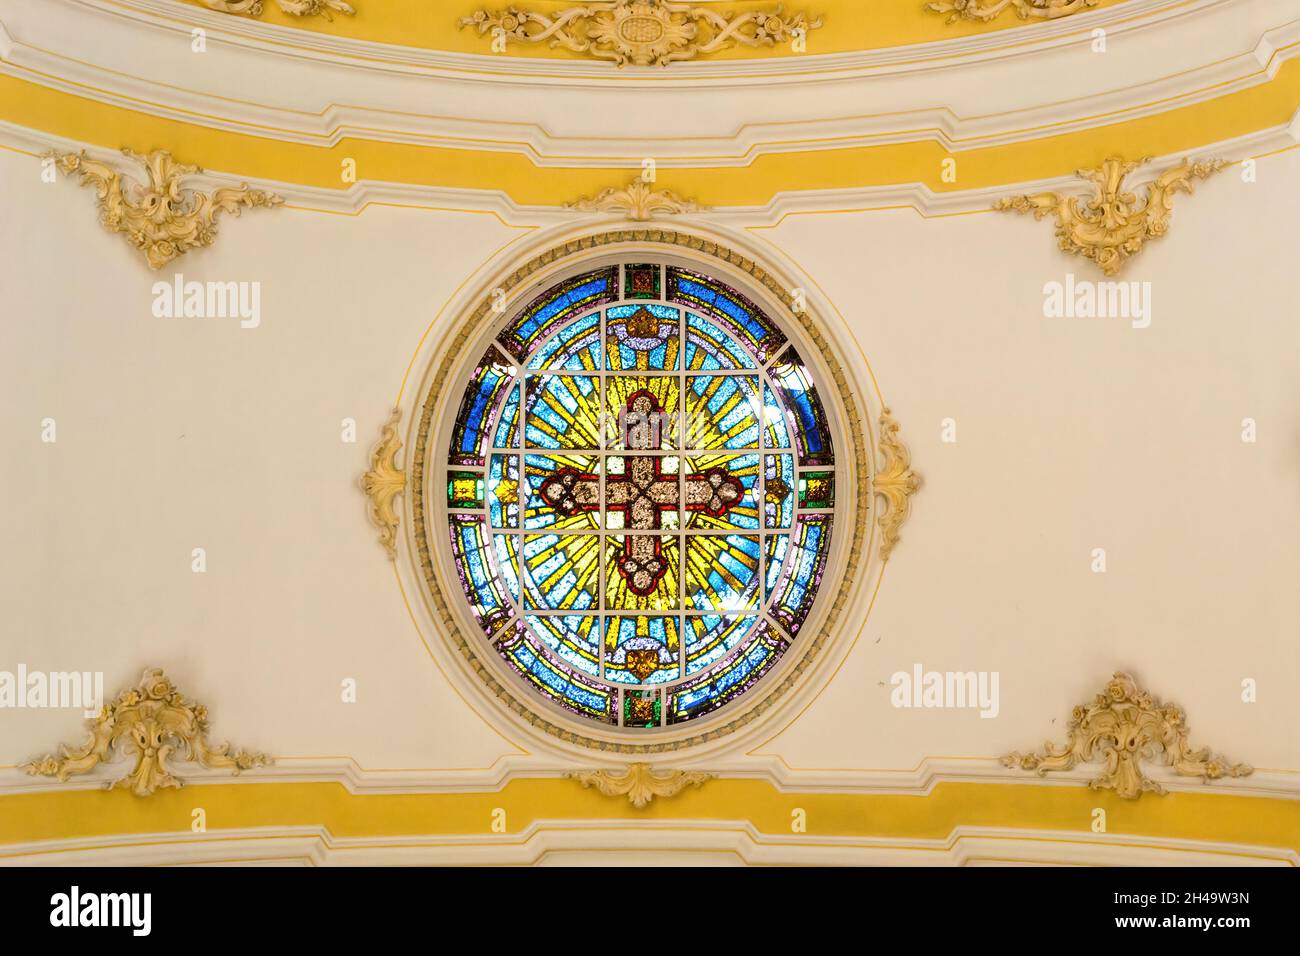 Stained glass skylight in the interior architecture of the Church of Santa Cruz dos Militares in Rio de Janeiro, Brazil. The old catholic temple is a Stock Photo